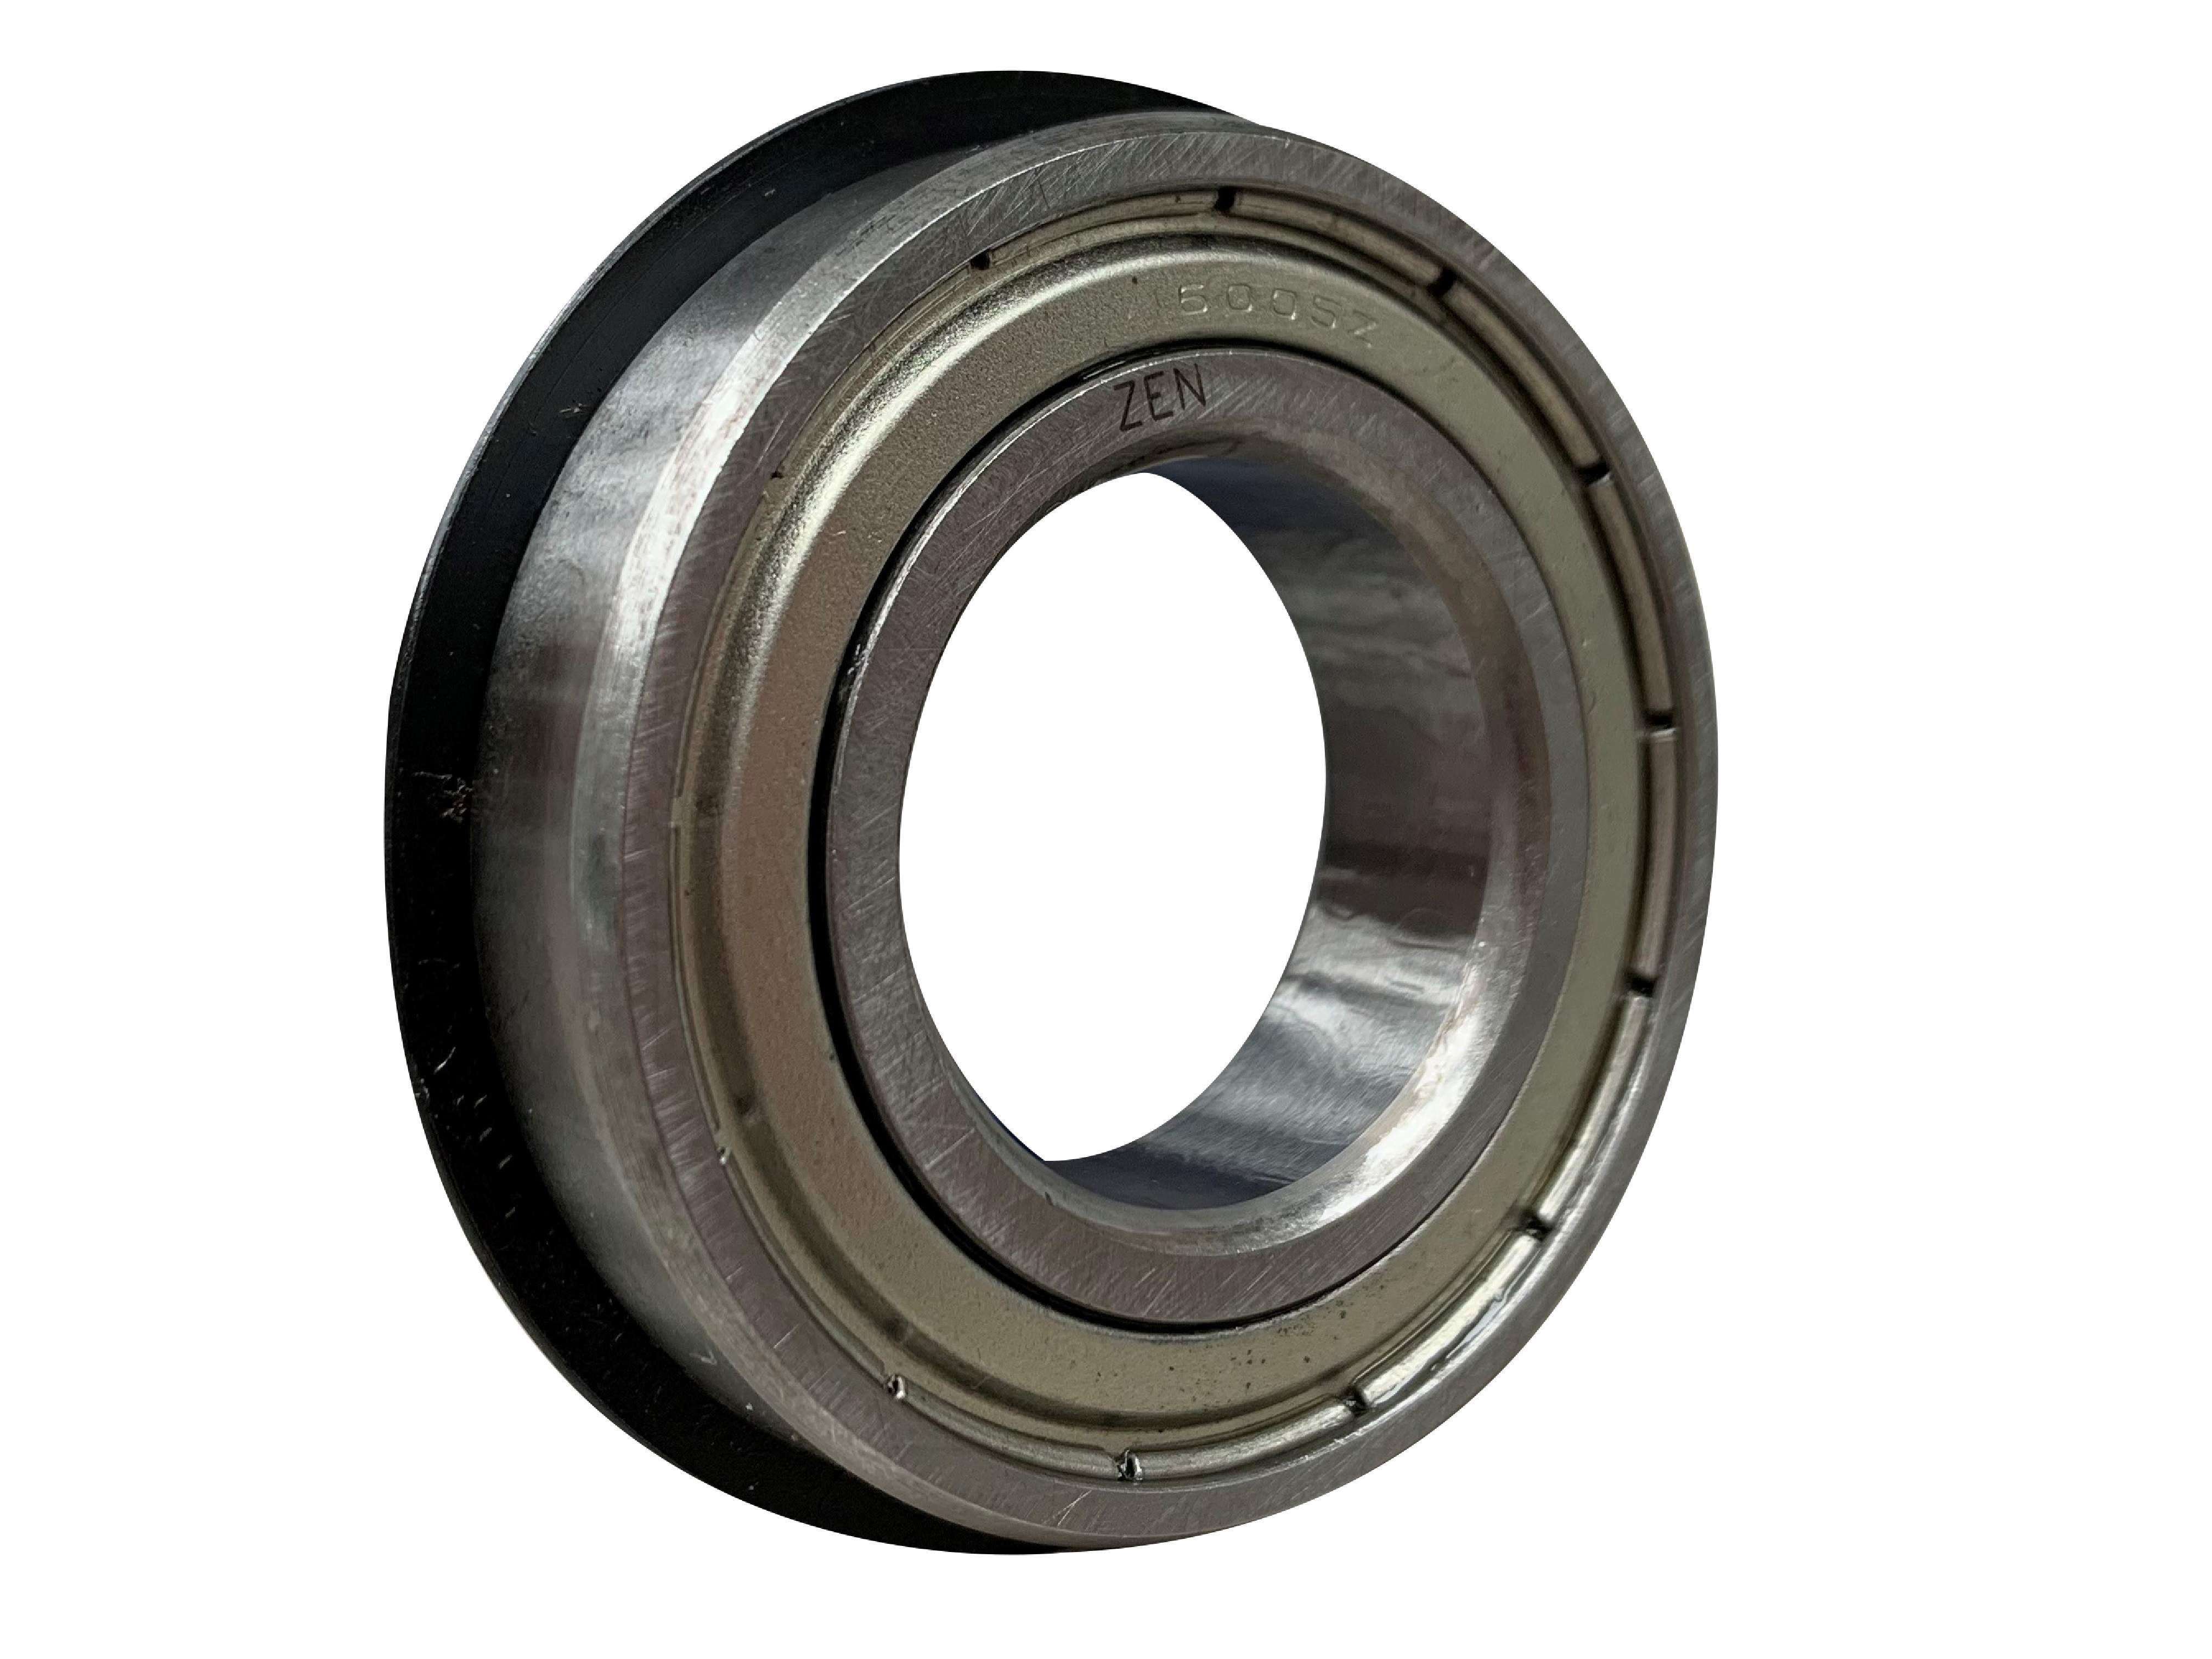 ZEN 6002-2Z-NR Shielded Ball Bearing With Snap Ring 15mm x 32mm x 9mm